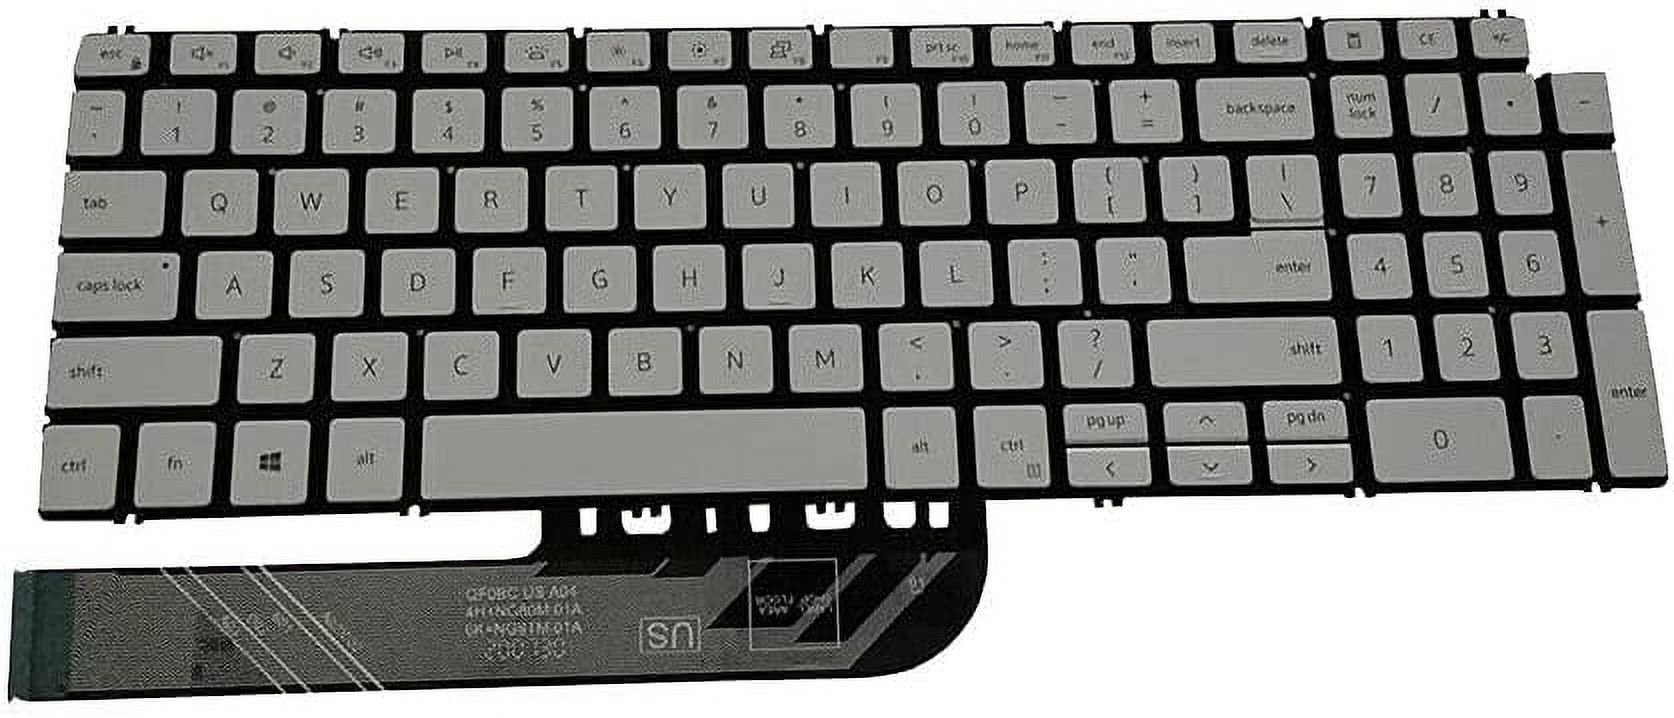 New US Silver English Backlit Laptop Keyboard (Without palmrest) for Dell Inspiron 7506 2-in-1 Inspiron 7500 2-in-1 Light Backlight - image 1 of 1